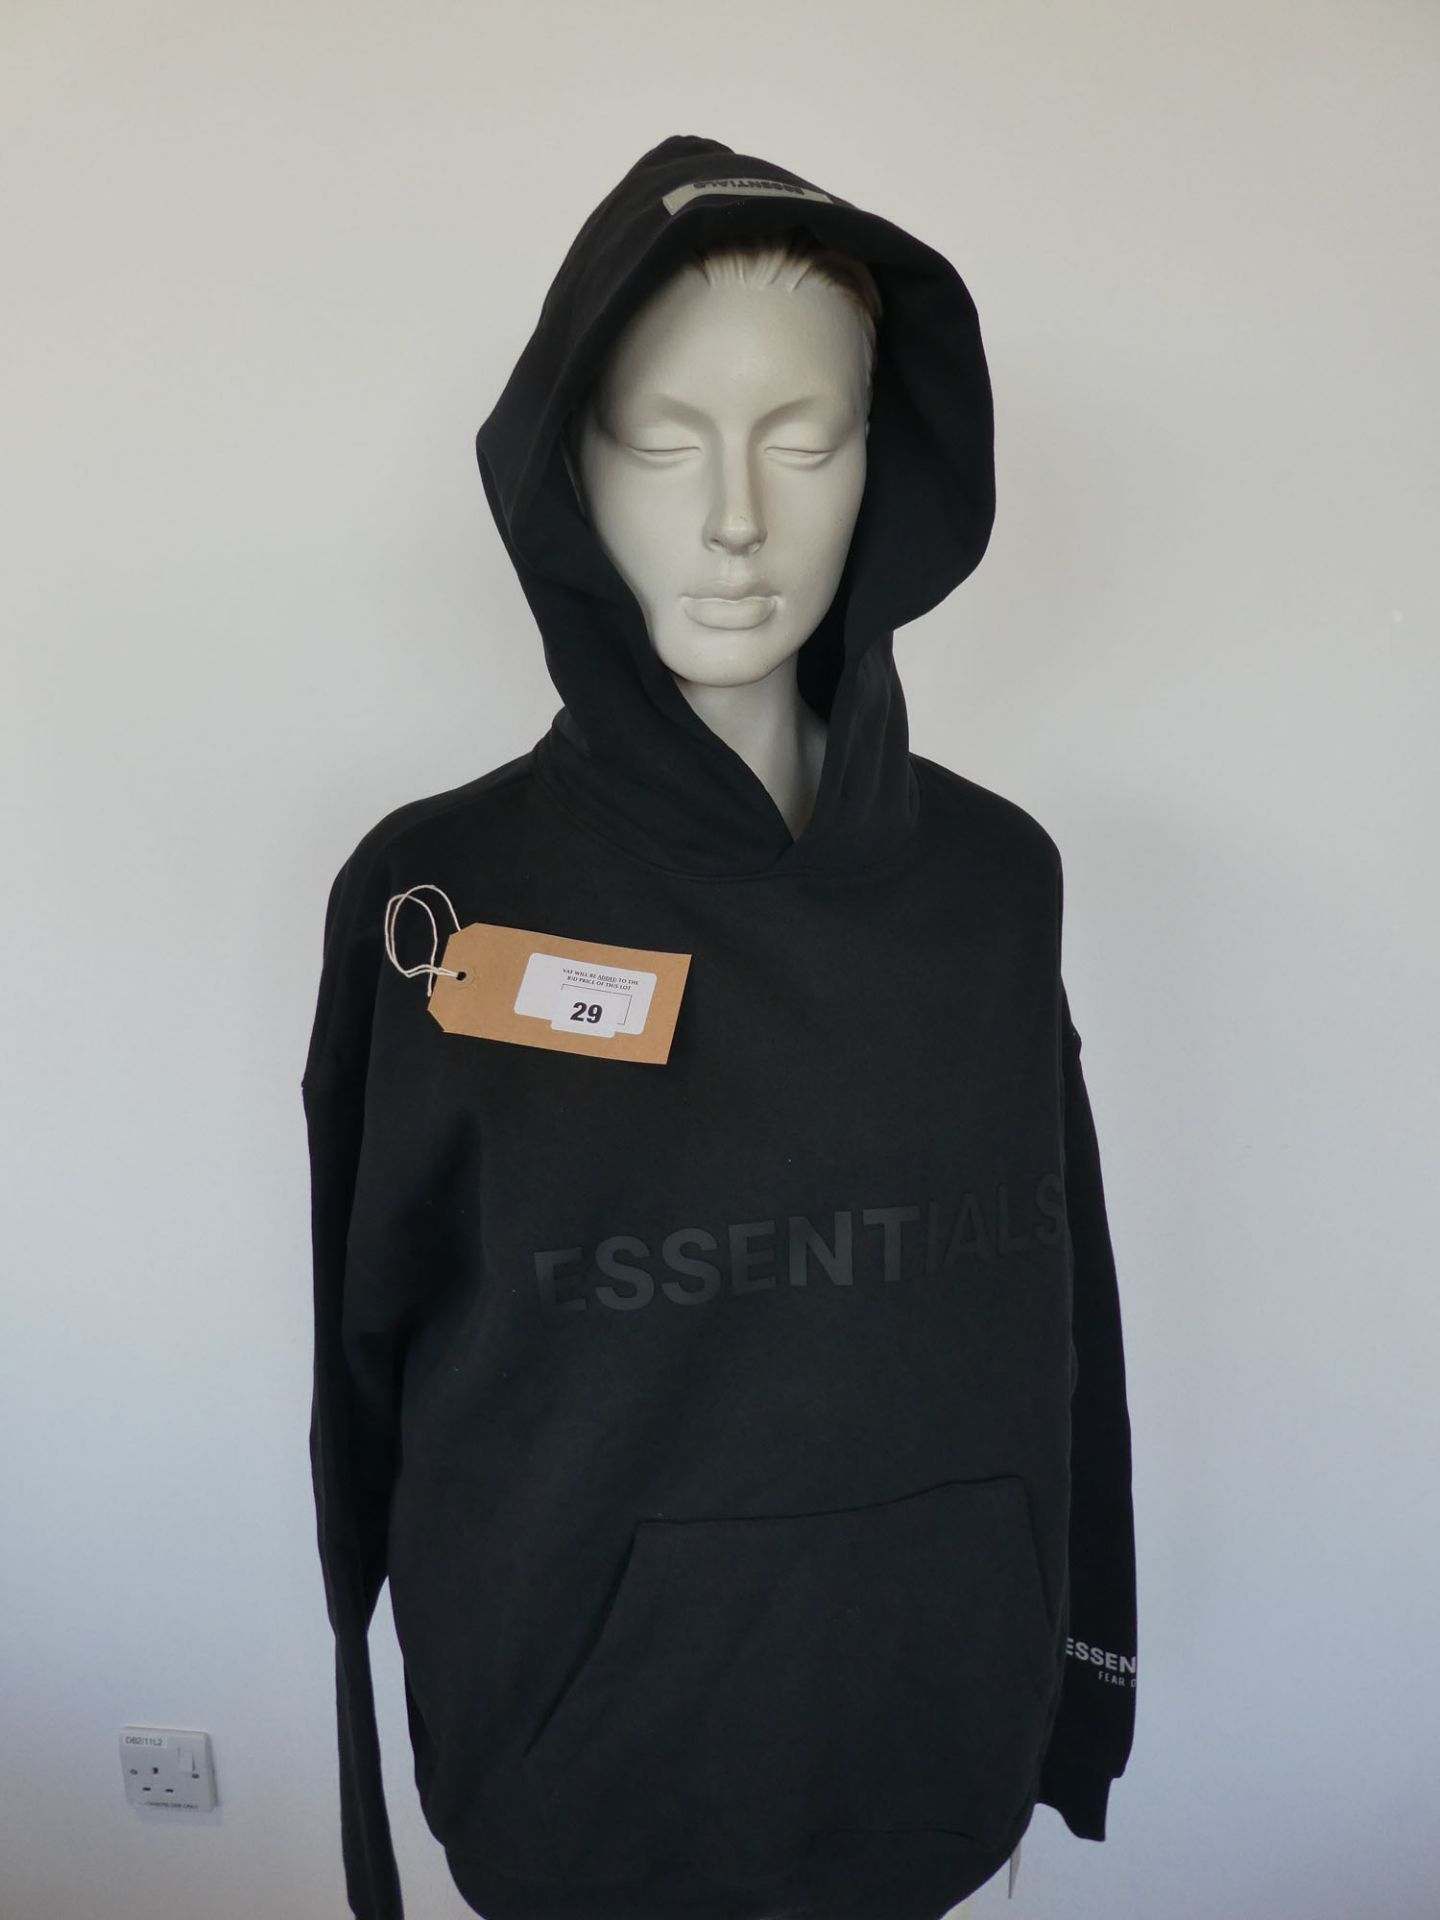 Essentials Fear of God hoodie in black size S